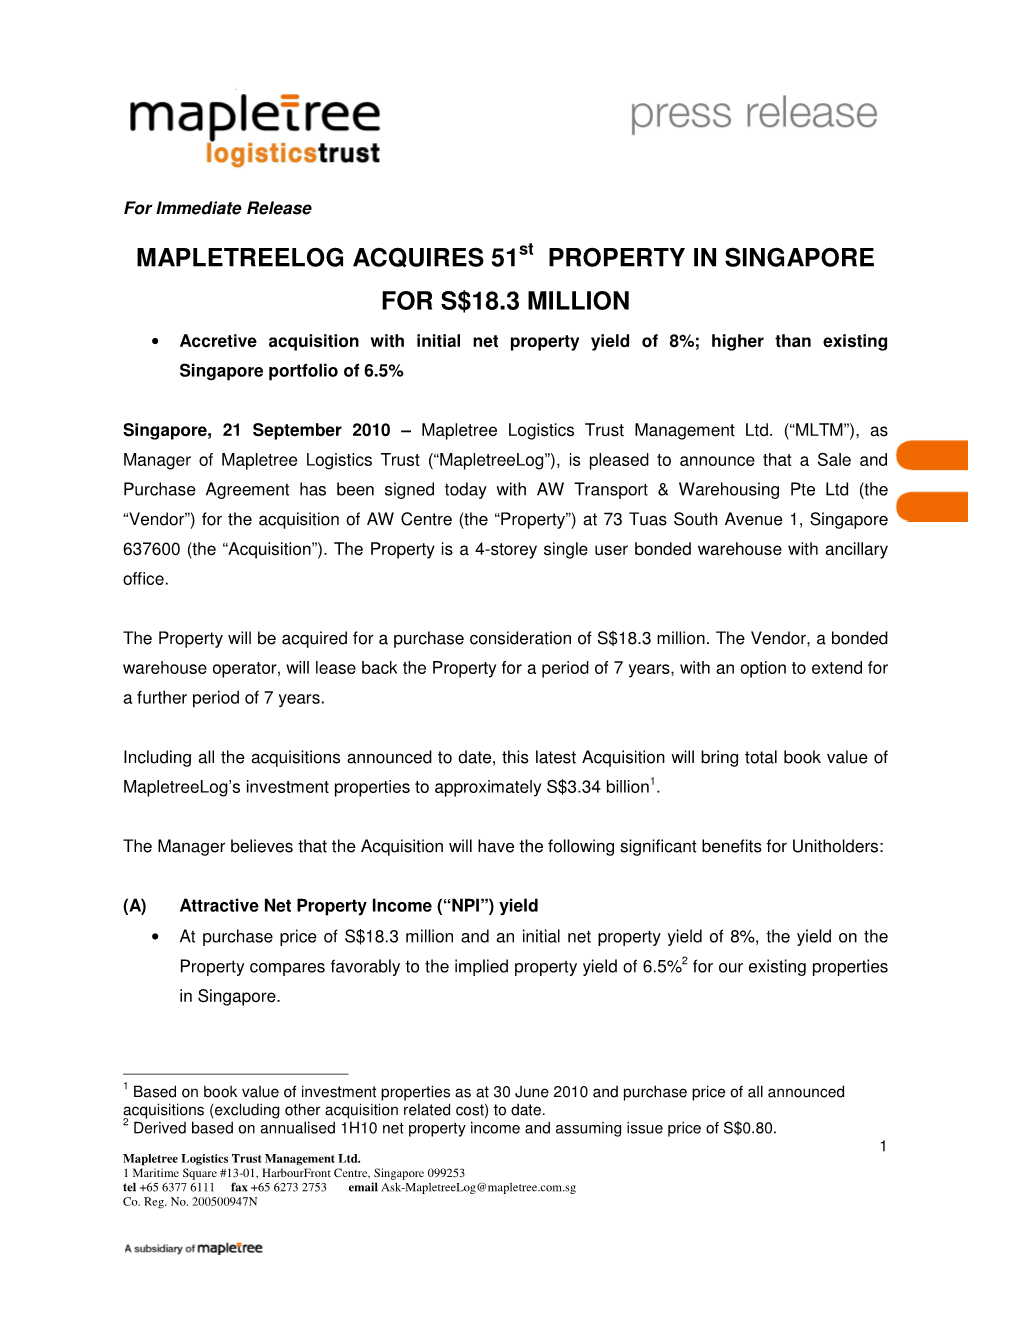 Mapletreelog Acquires 51 Property in Singapore for S